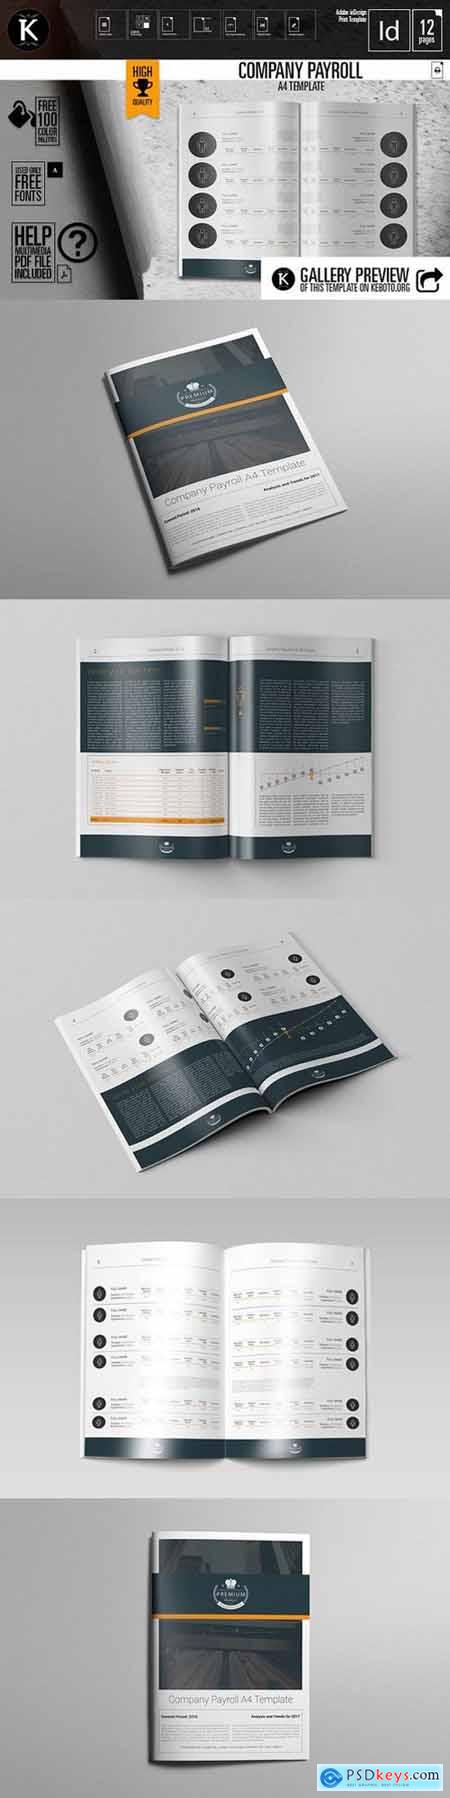 Company Payroll A4 Template Free Download Photoshop Vector Stock 